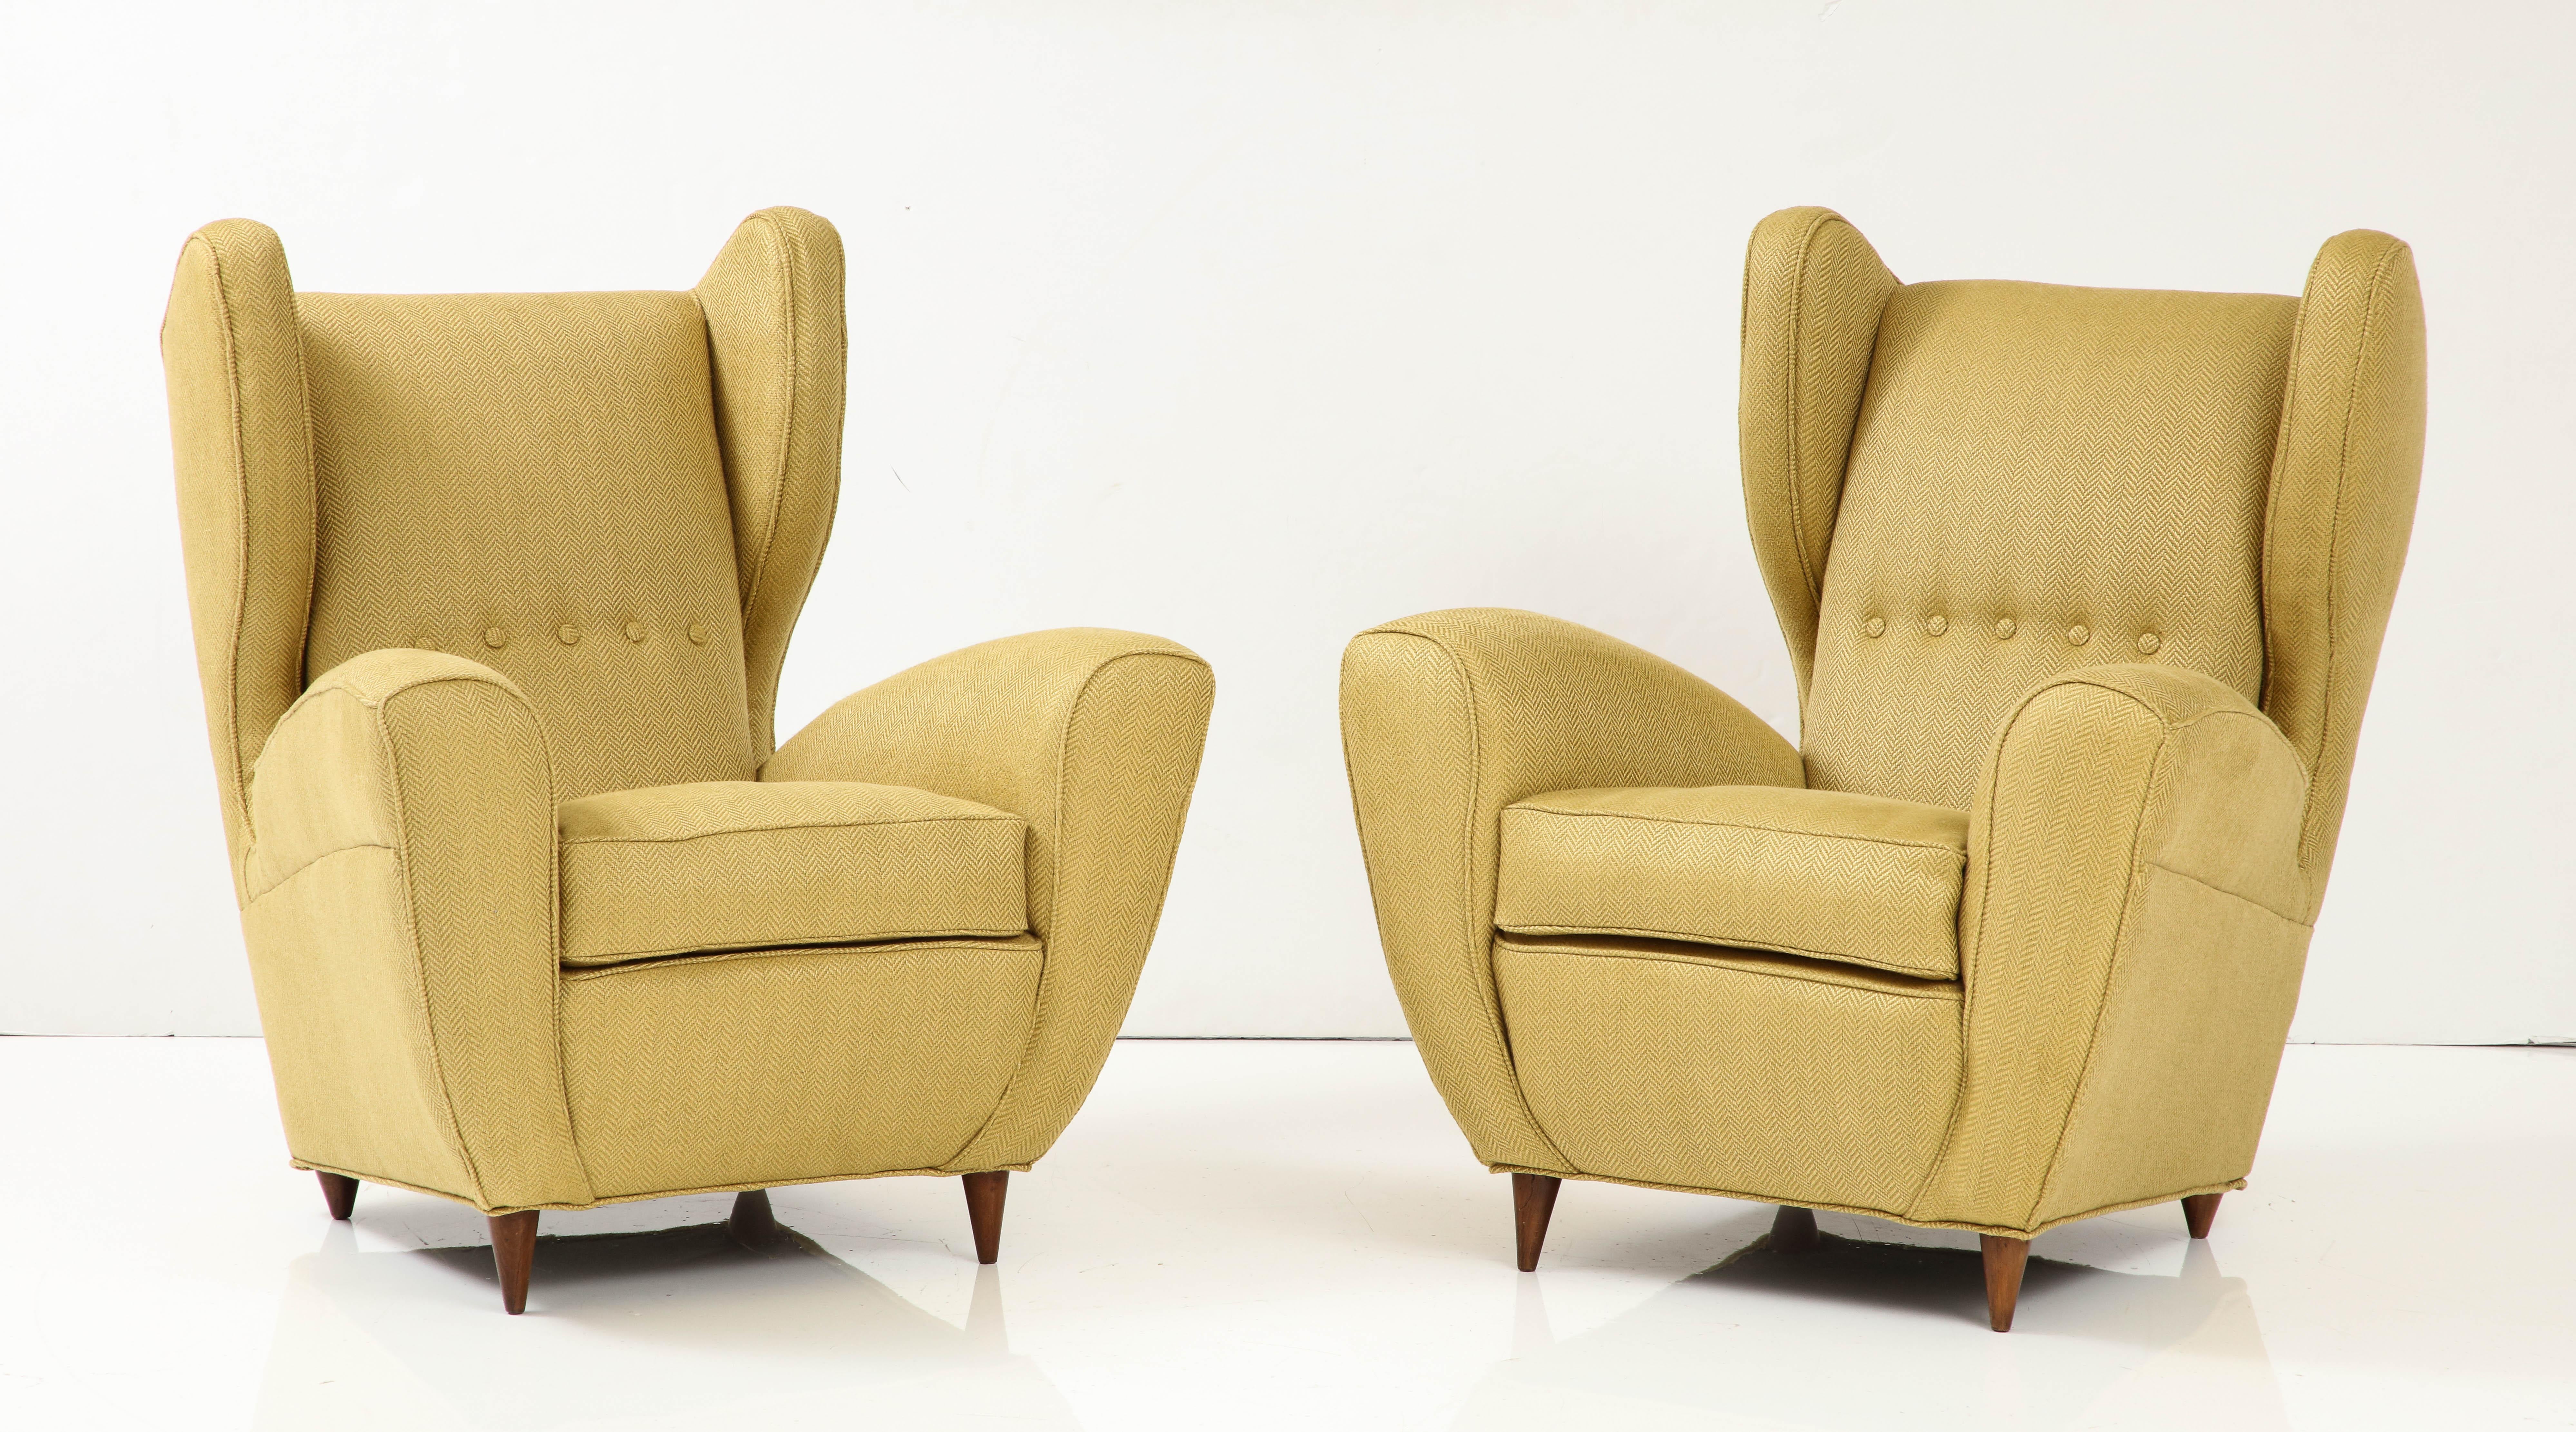 Linen Melchiorre Bega Wingback Lounge Chairs Italy 1950's For Sale